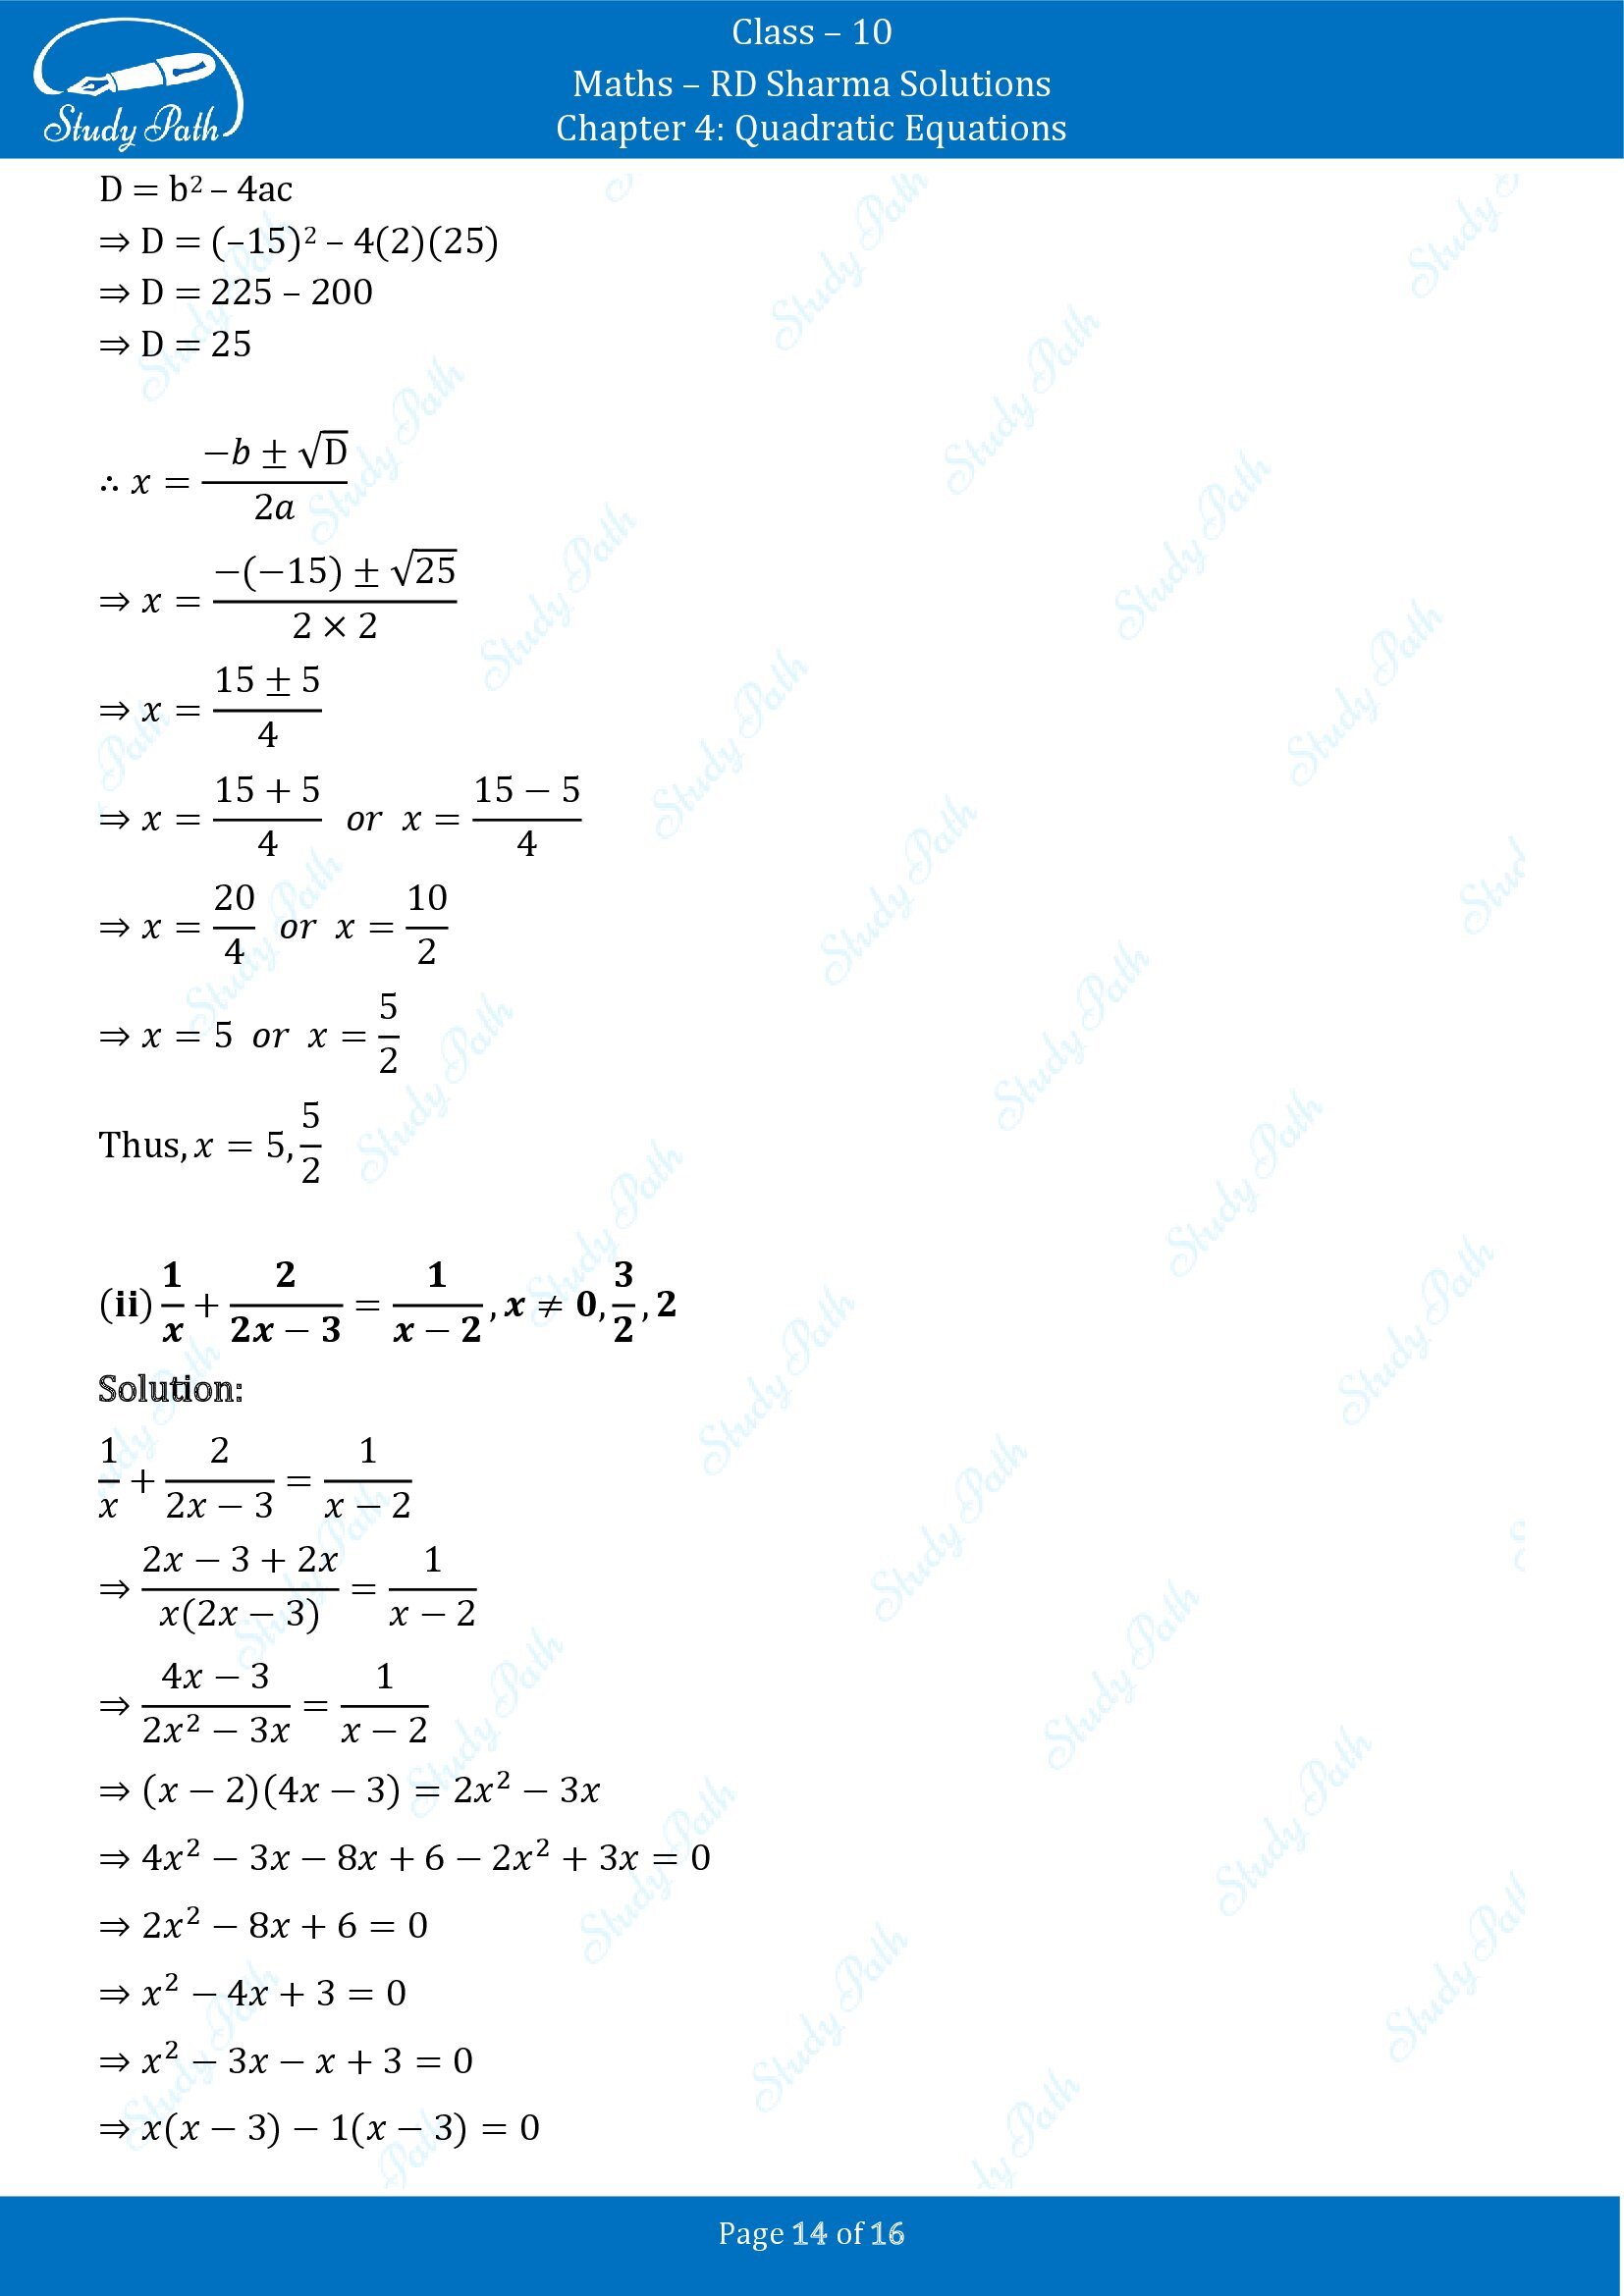 RD Sharma Solutions Class 10 Chapter 4 Quadratic Equations Exercise 4.5 00014